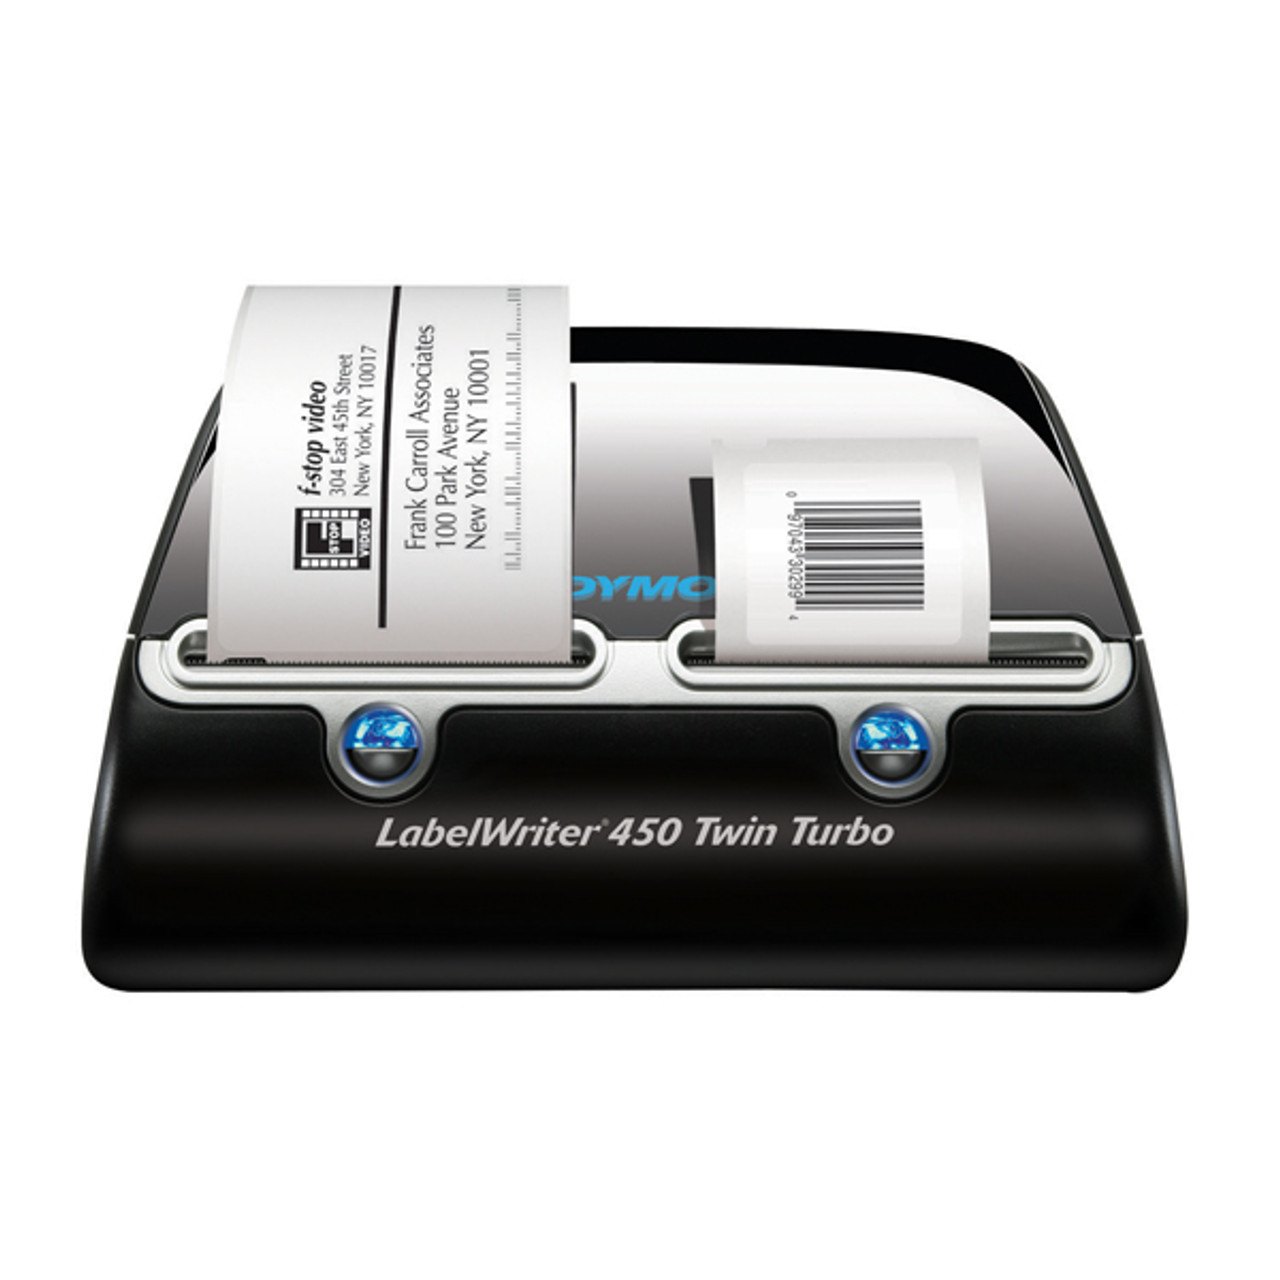 Dymo LabelWriter 450 Twin Turbo Label Printer S0838910 Supplies for  Schools